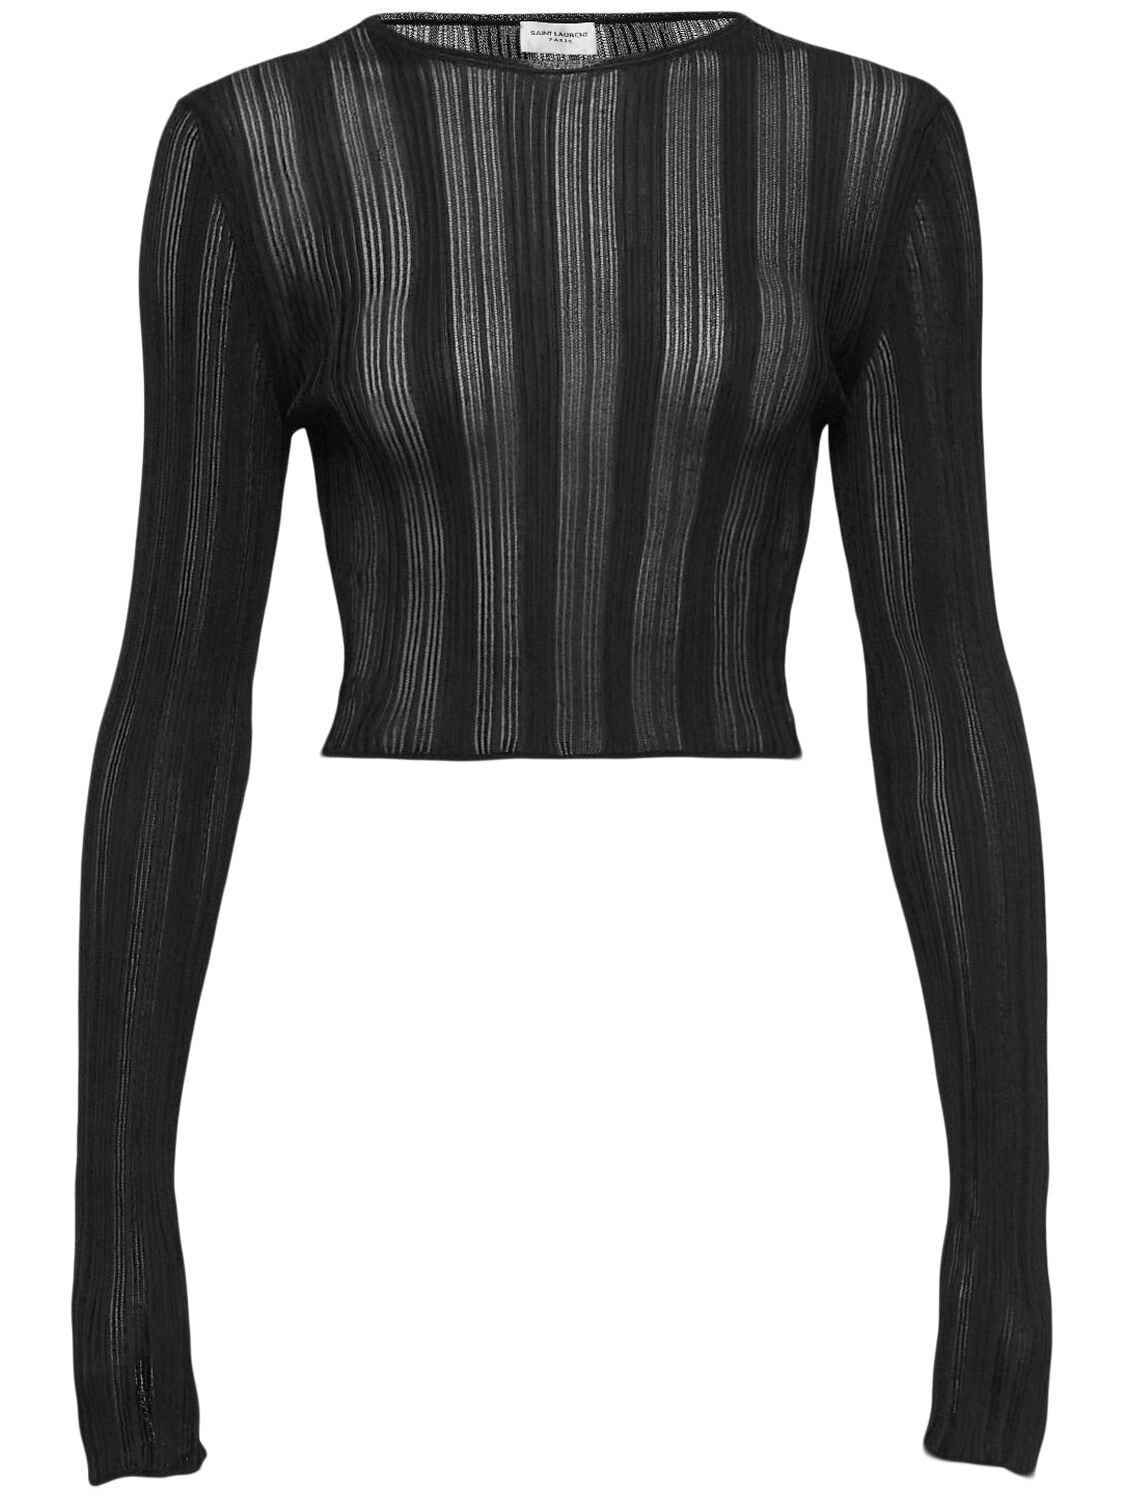 Image of Extra Fine Viscose Long Sleeve Top